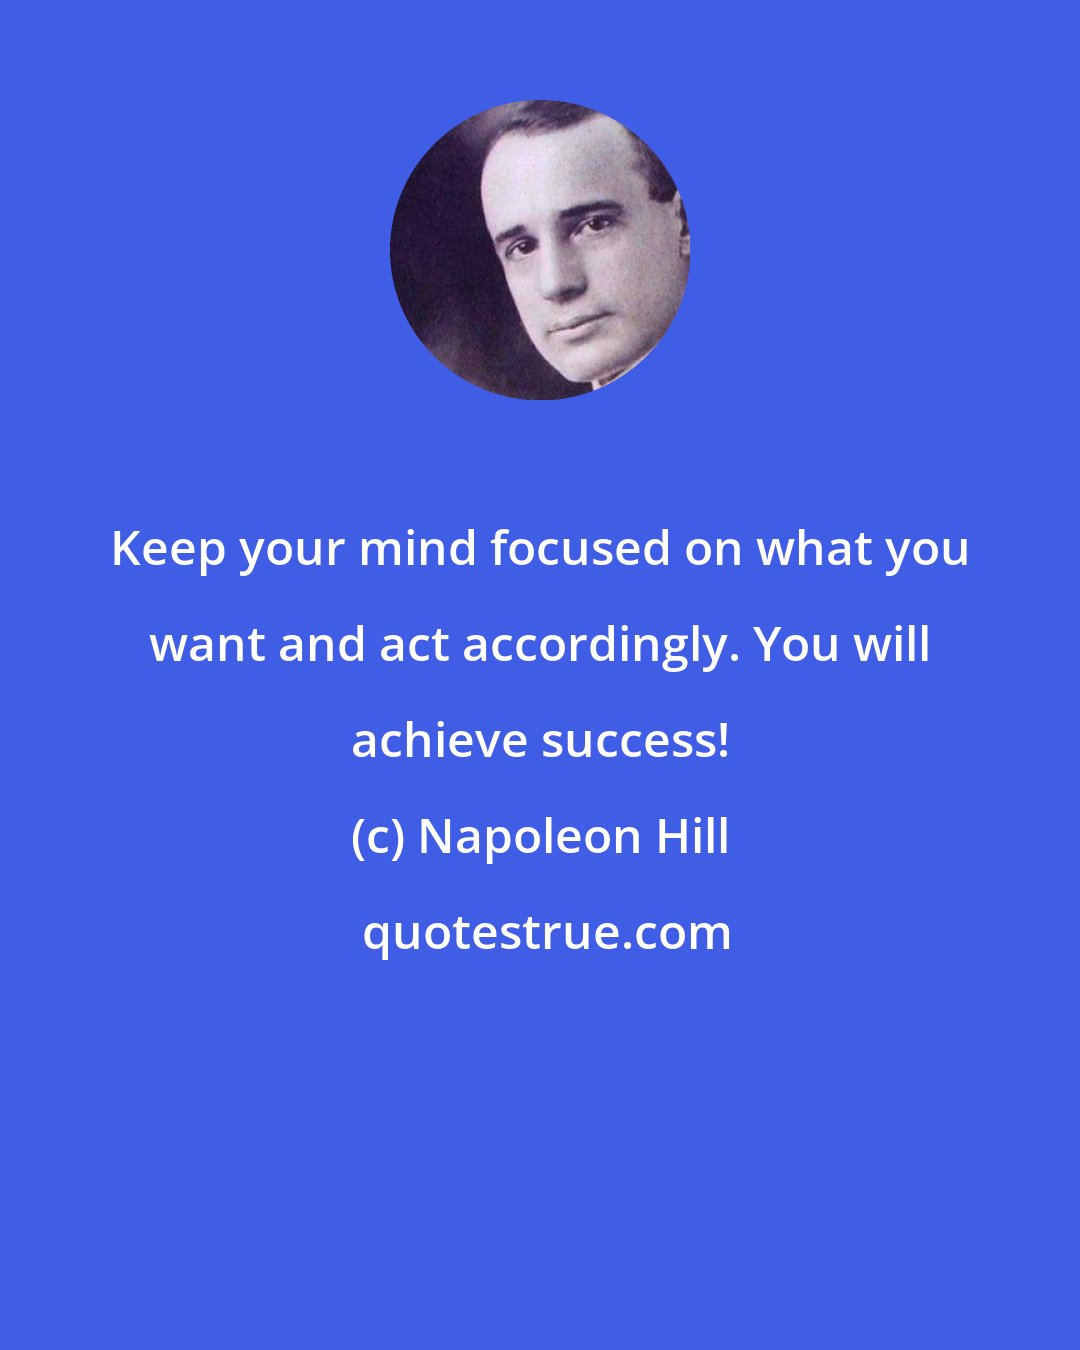 Napoleon Hill: Keep your mind focused on what you want and act accordingly. You will achieve success!